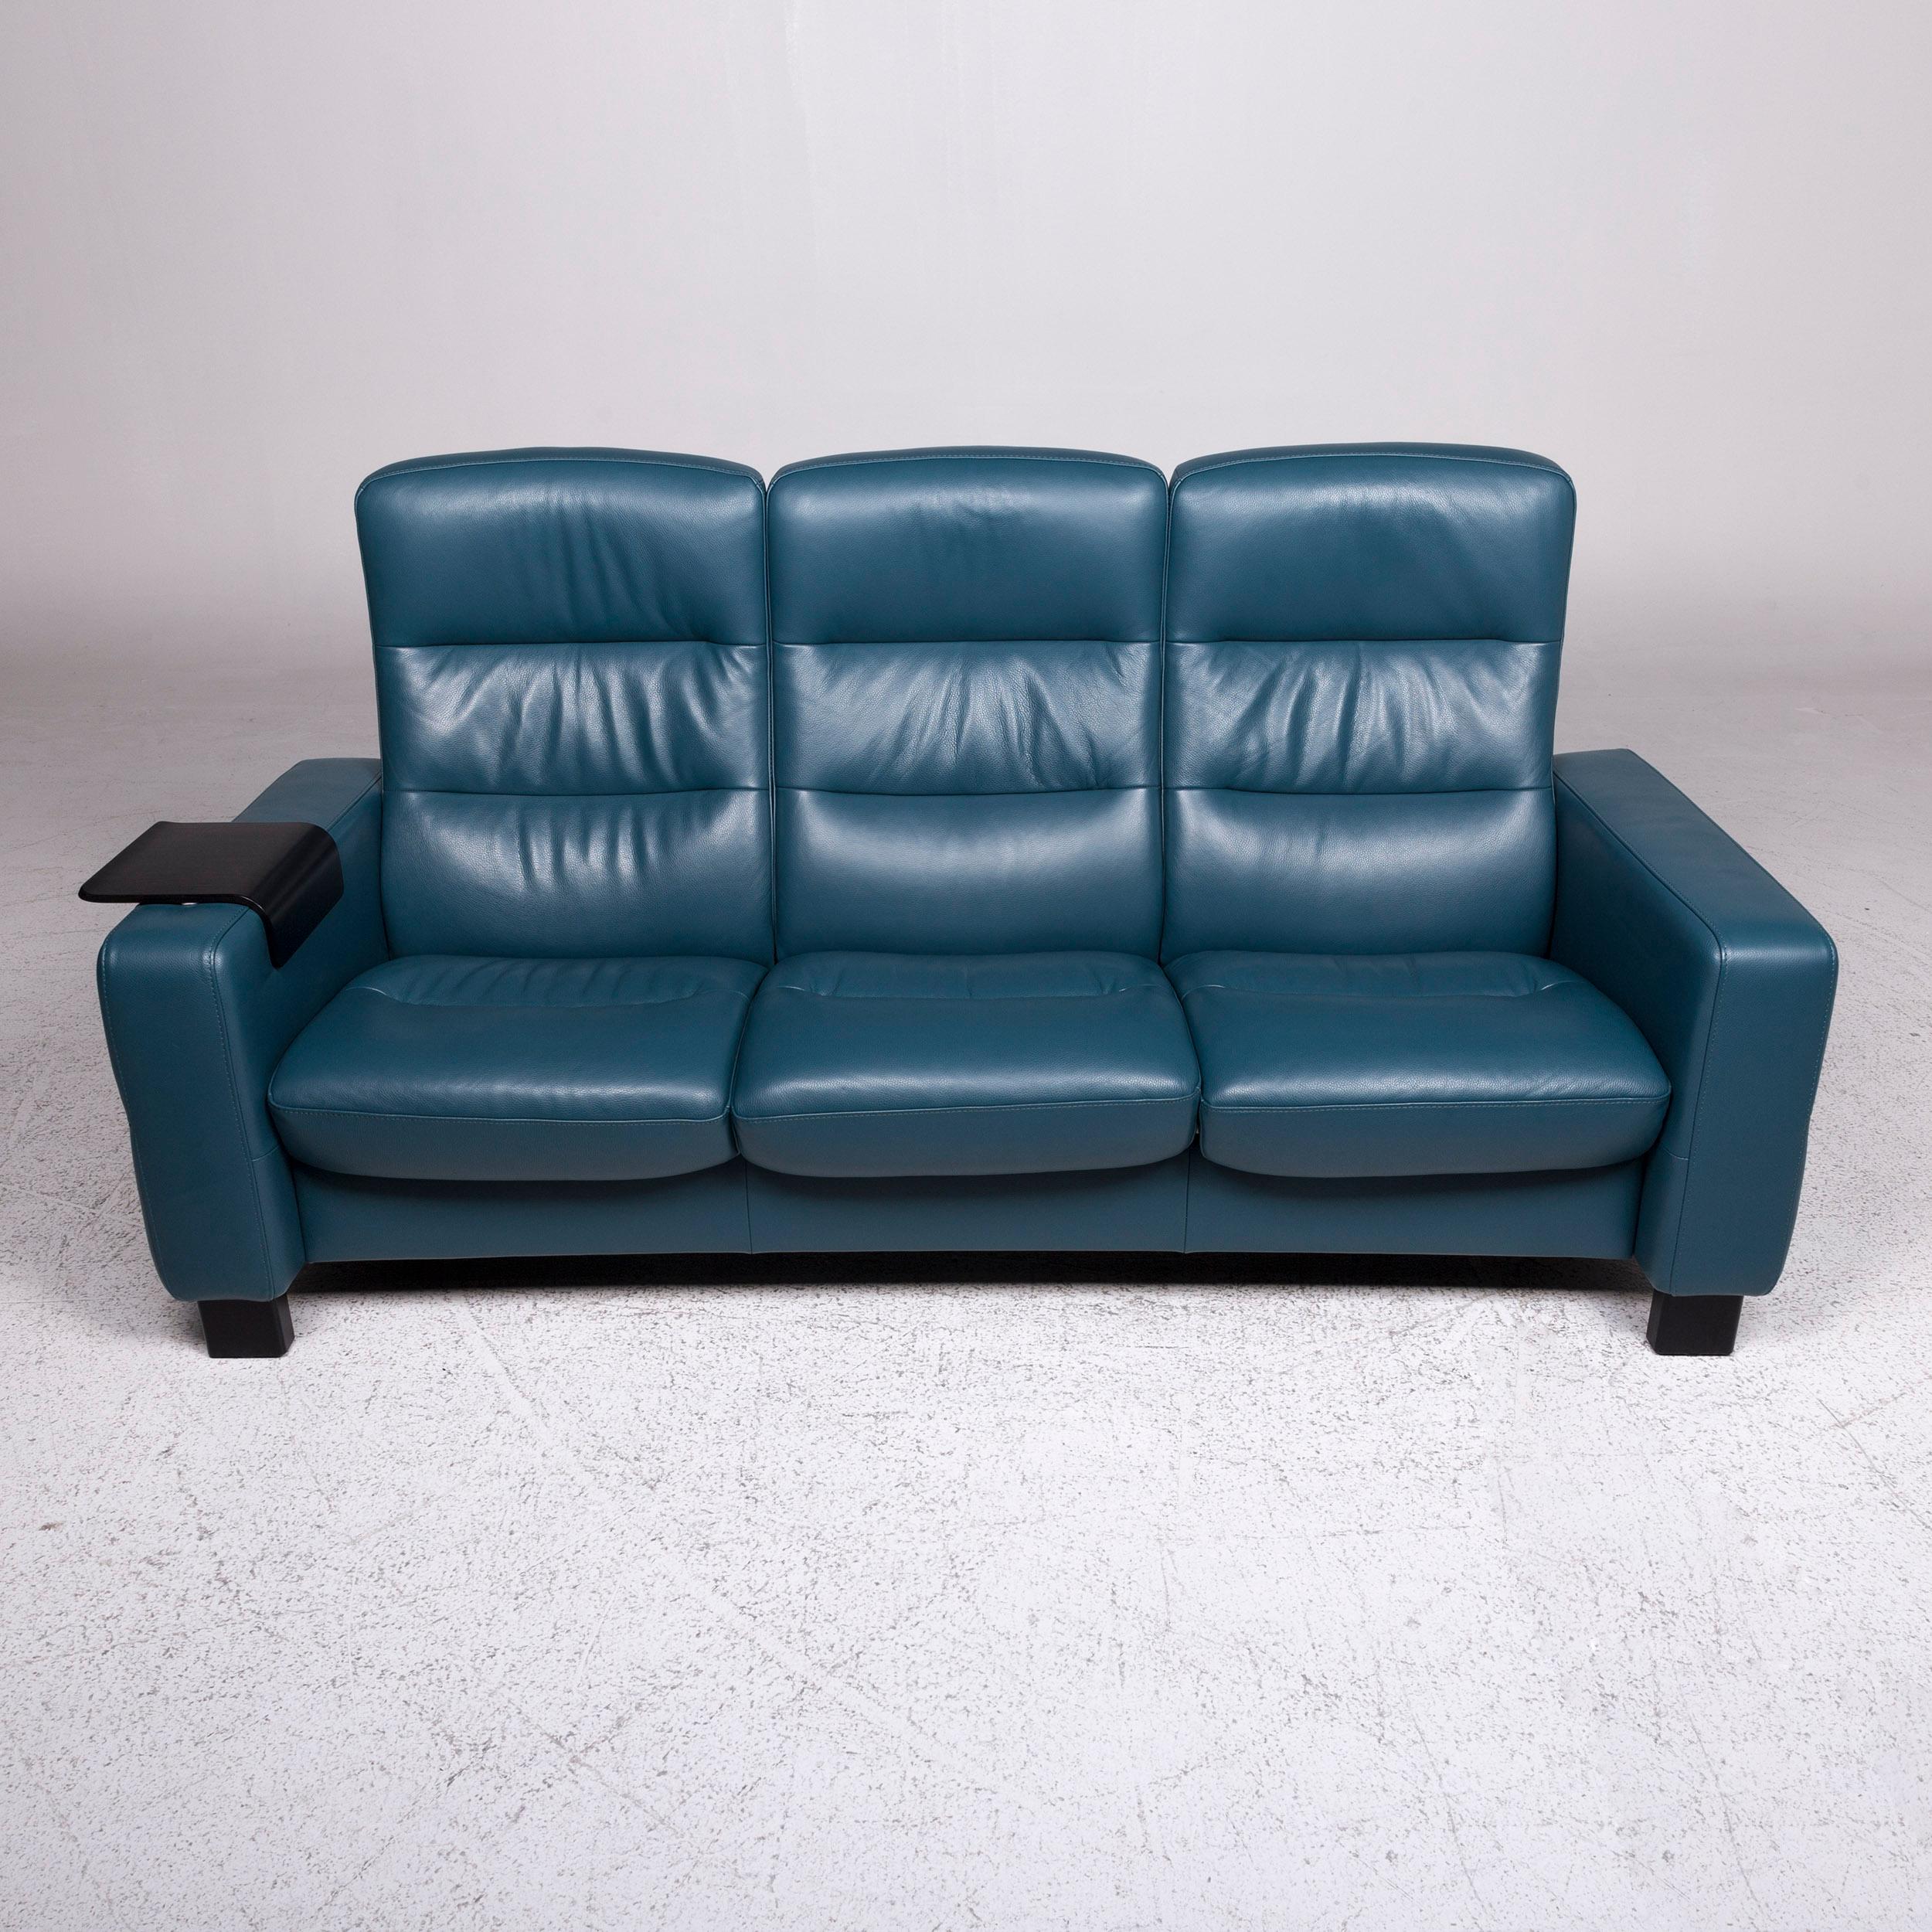 Contemporary Stressless Leather Sofa Blue Petrol Three-Seat Function Couch